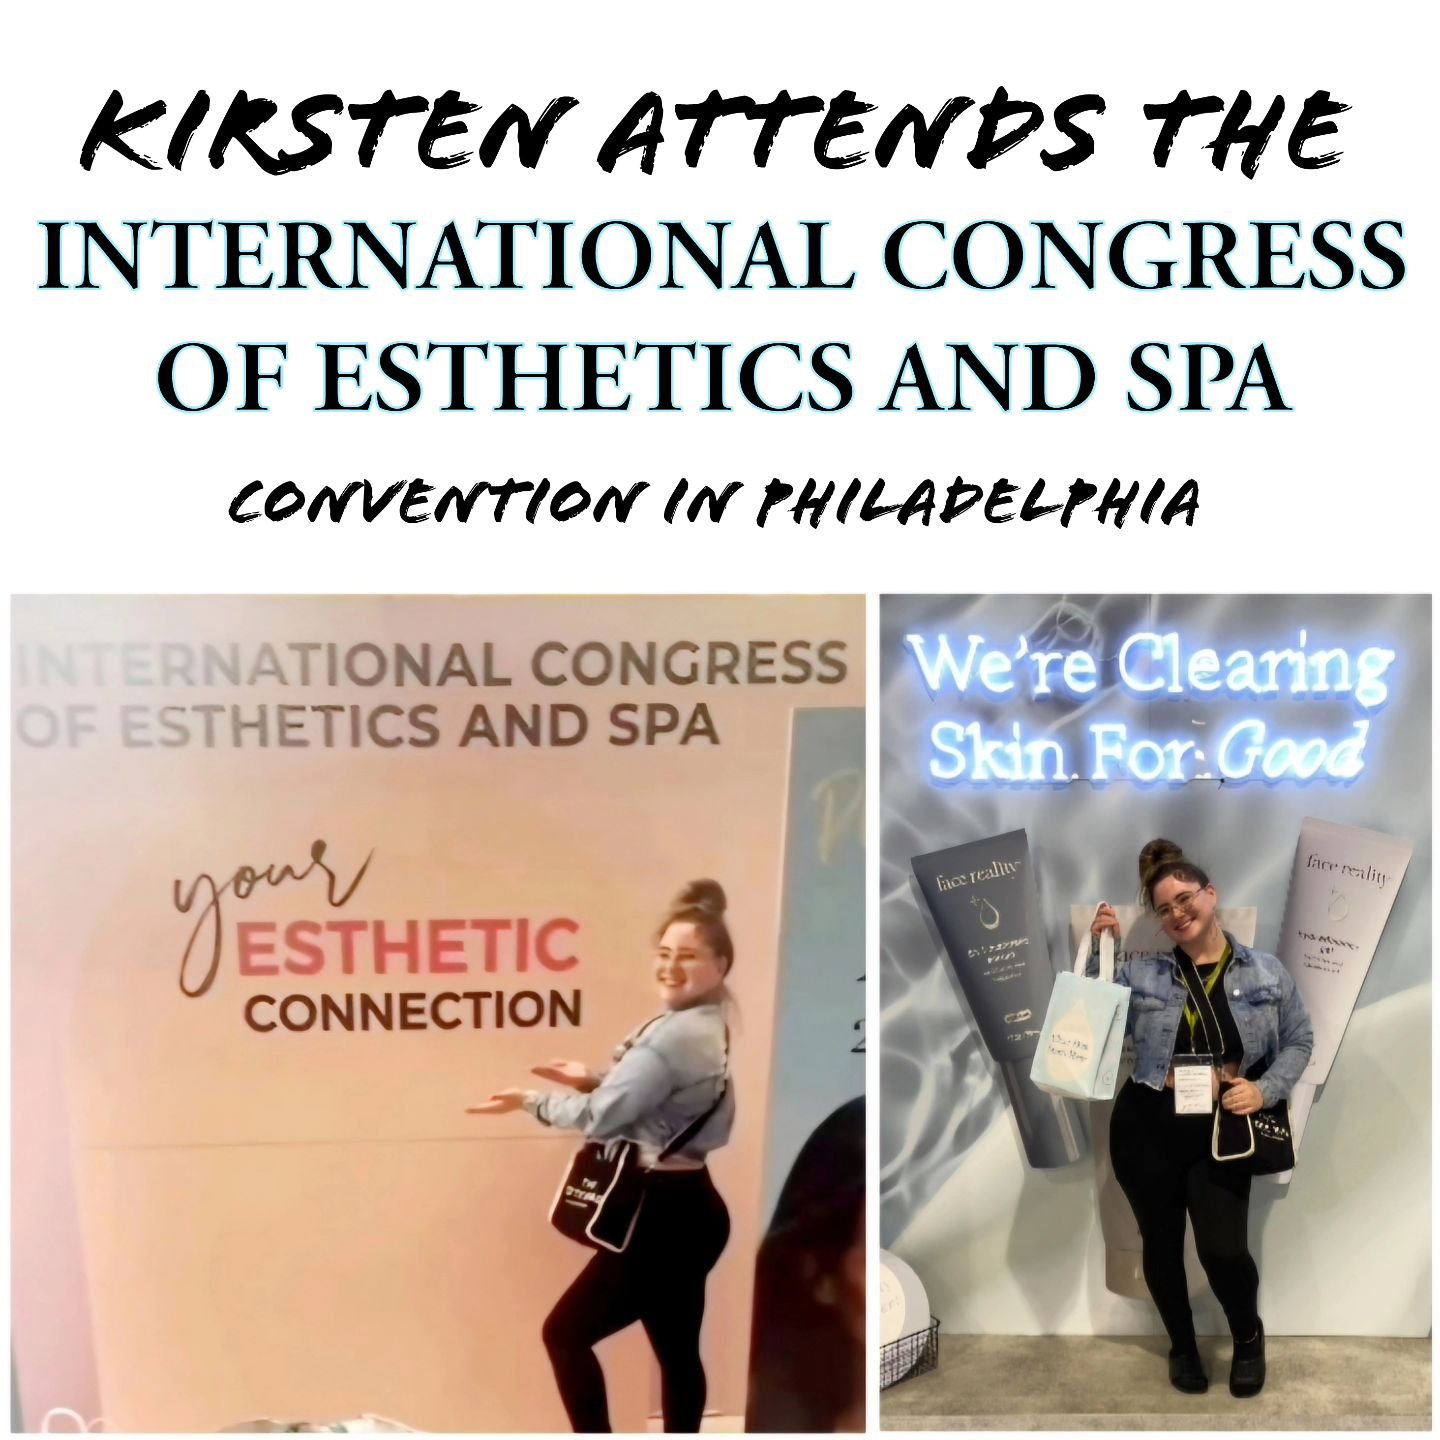 Last week, our Esthetician, Kirsten, attended the International Congress Of Esthetics And Spa trade show in Philadelphia. She sat in on seminars and educational classes to further her knowledge of skincare and see what new advances that have been mad